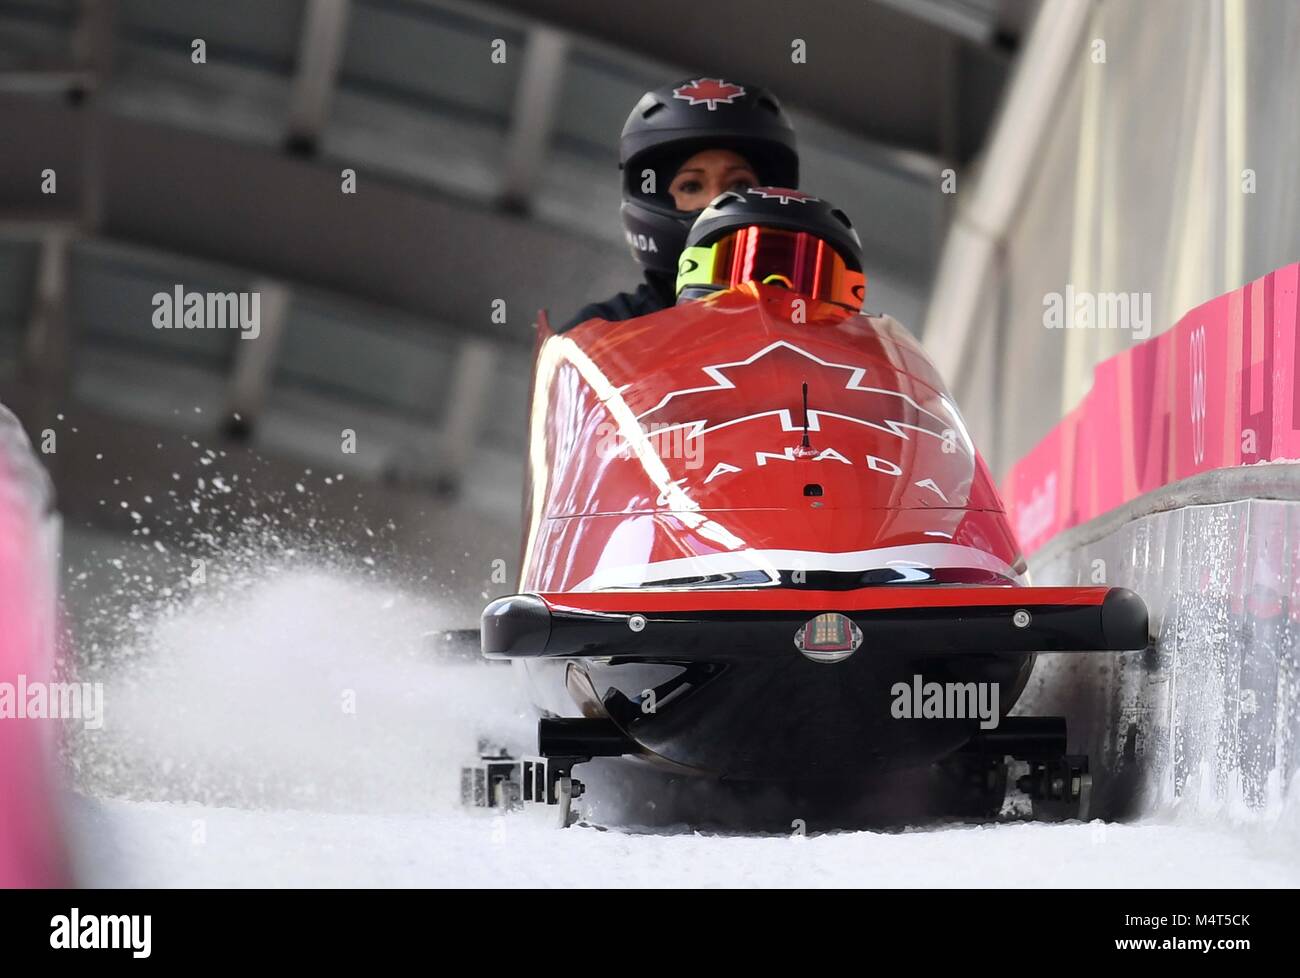 Kaillie Humphries (CAN) and Phylicia George (CAN). Womens bobsleigh training. Alpensia sliding centre. Pyeongchang2018 winter Olympics. Alpensia. Republic of Korea. 17/02/2018. Credit: Sport In Pictures/Alamy Live News Stock Photo